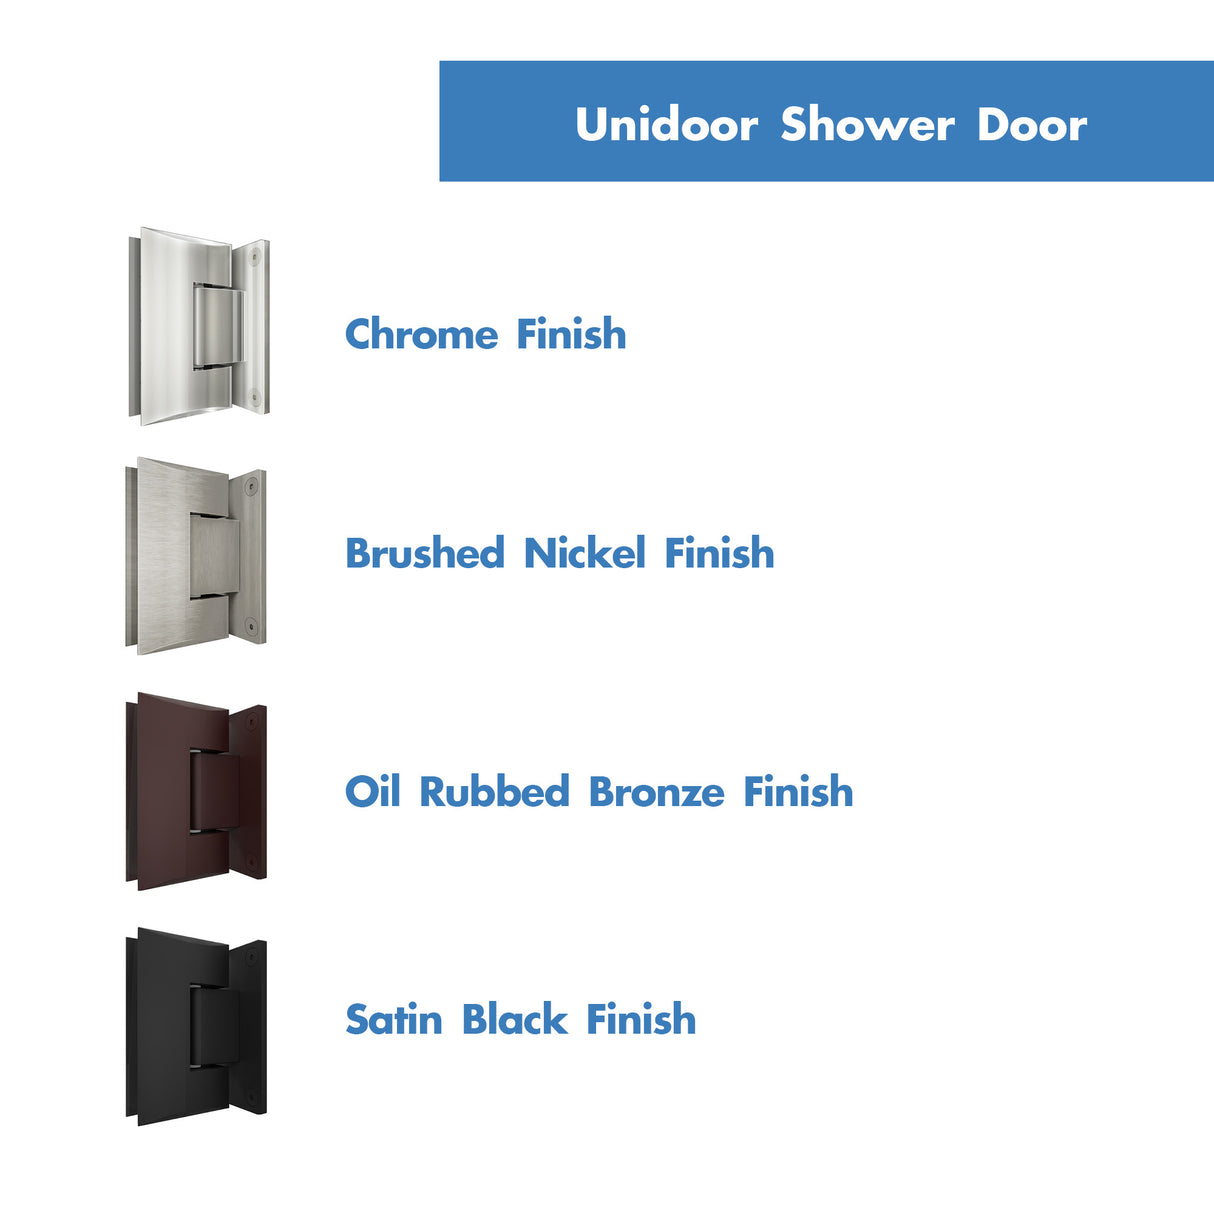 DreamLine Unidoor Plus 42 1/2 in. W x 34 3/8 in. D x 72 in. H Frameless Hinged Shower Enclosure in Chrome